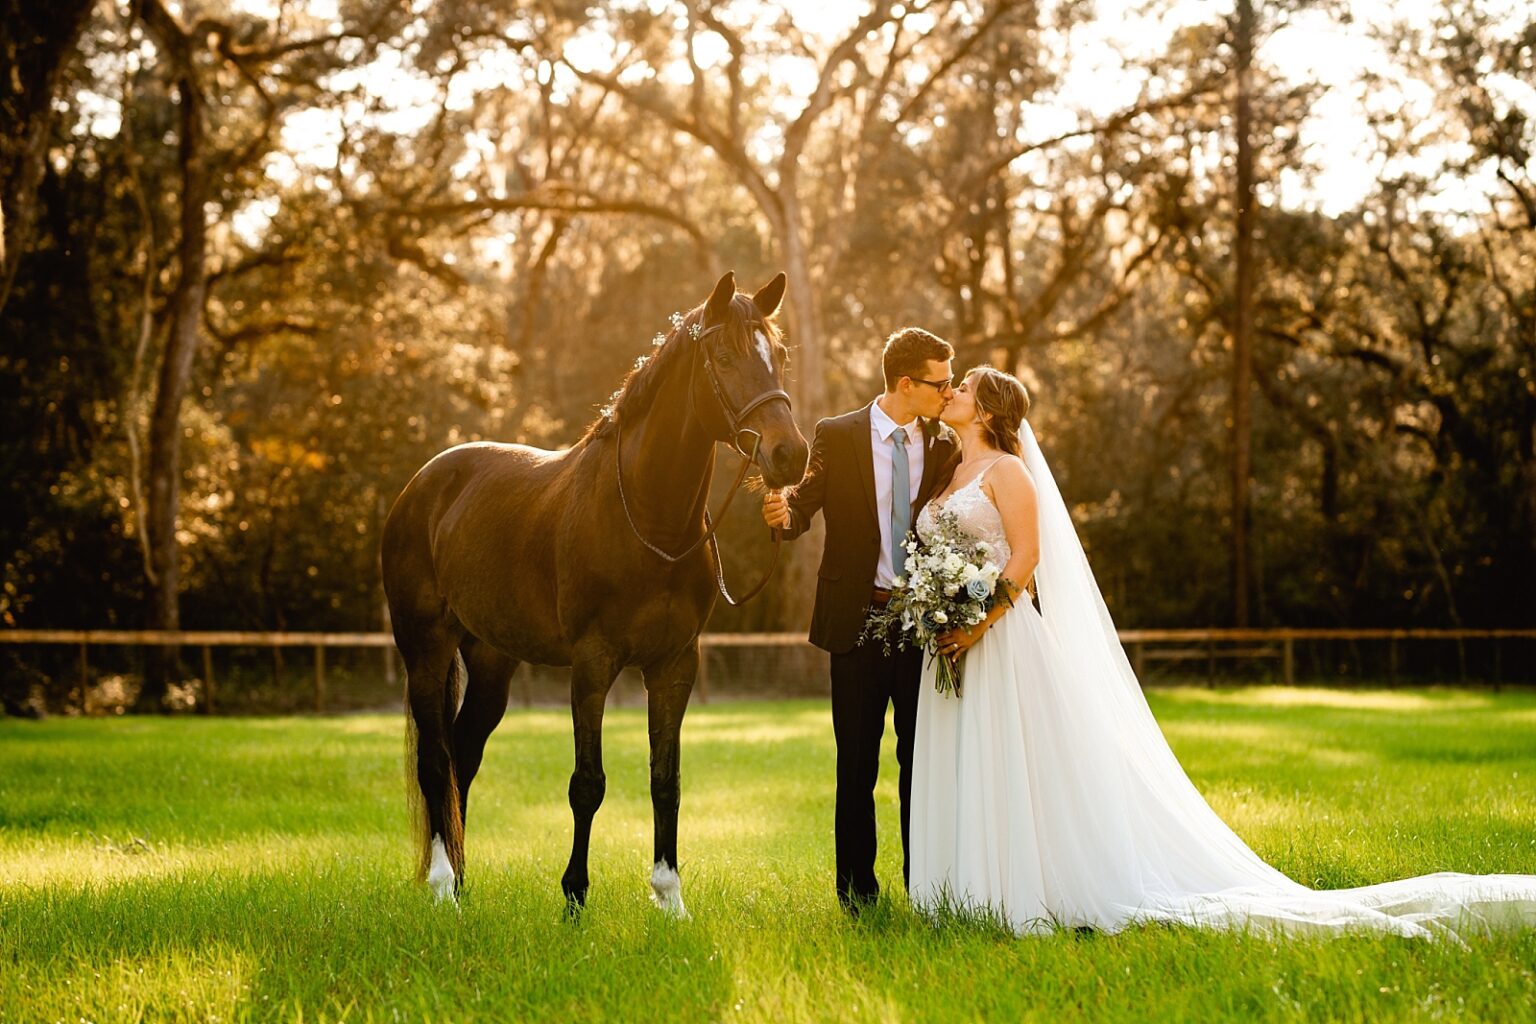 Wedding ideas with horses. Babys breath in horses mane. Bride and groom take photos with horse during sunset.